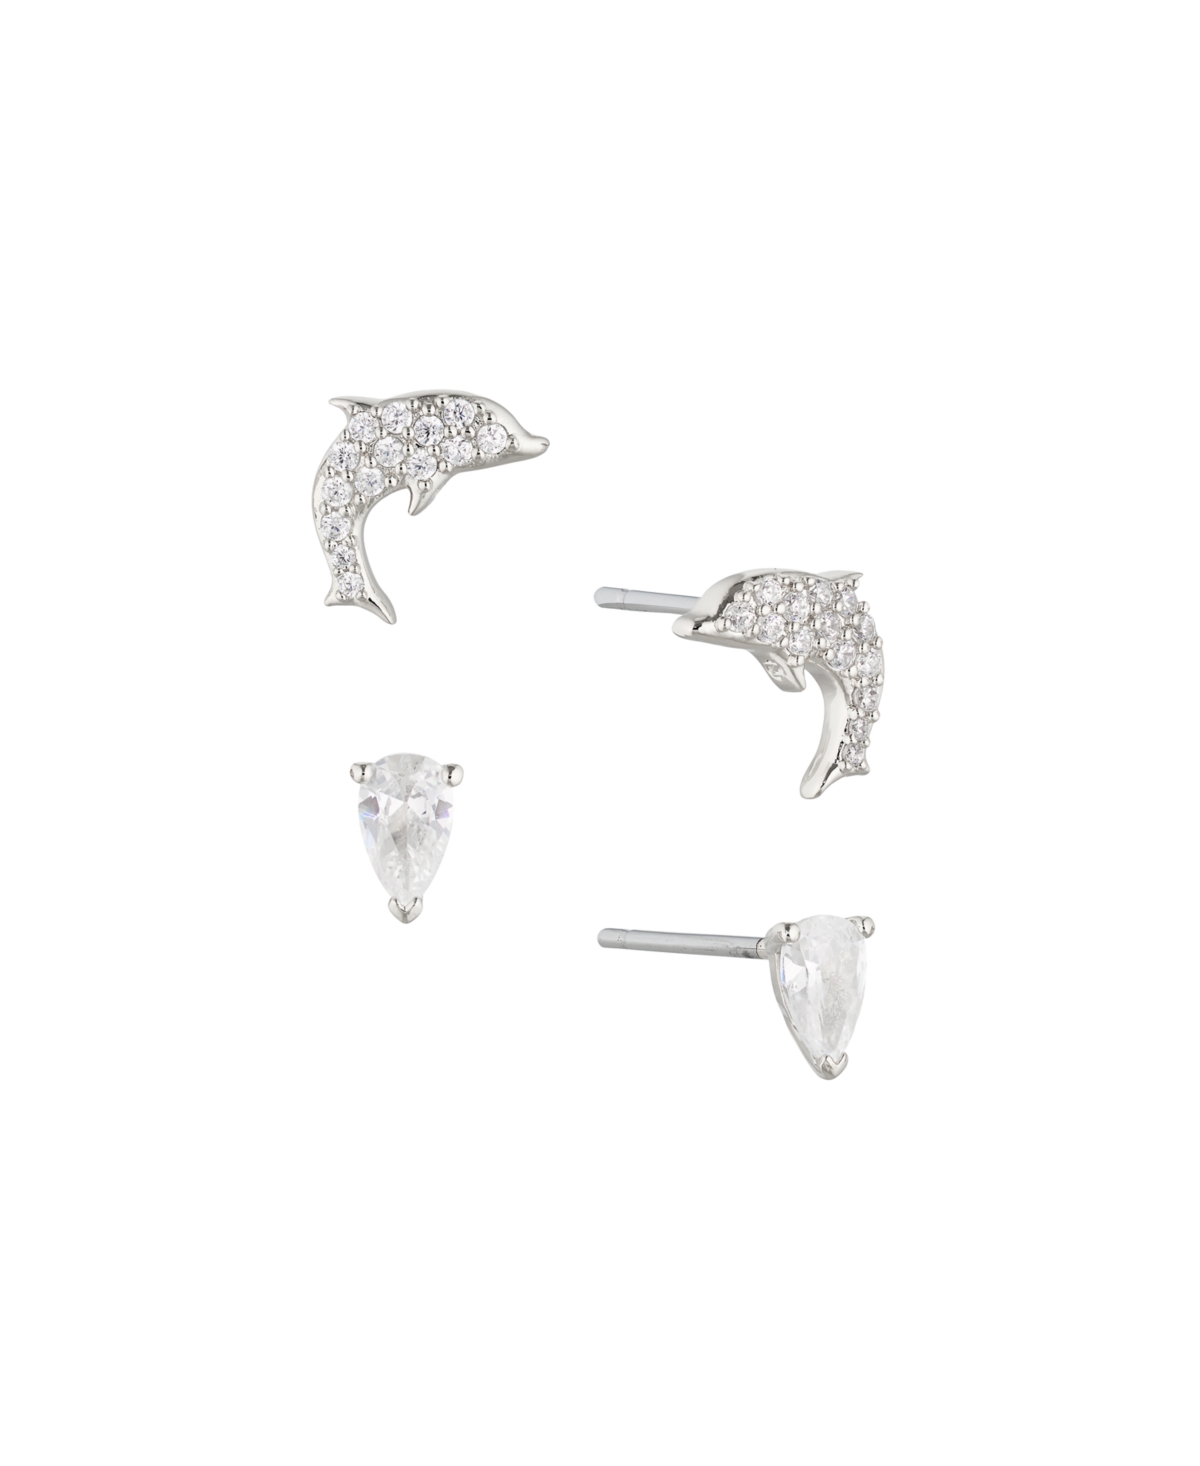 Ava Nadri Rhodium Cubic Zirconia Dolphin Style And Pear Shaped Stud Earrings Set Of Two Pair In Silver